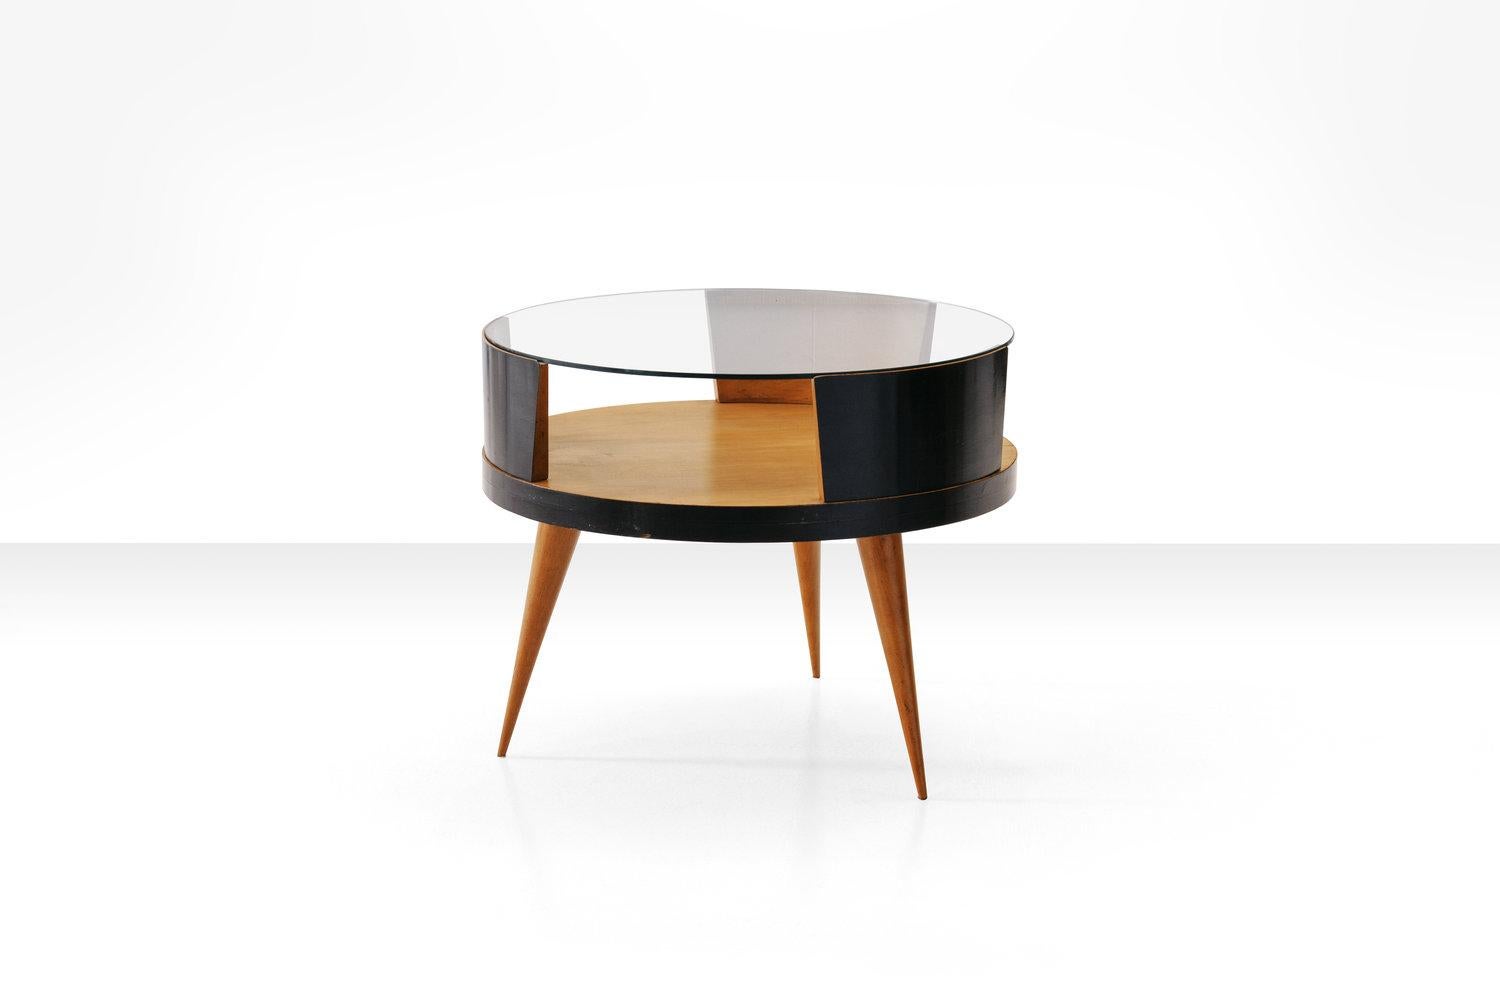 Martin Eisler coffee table in Caviuna wood and glass, Brazil 1950s

This small coffee table is designed by Martin Eisler and Susi Aczel for Forma. The coffee table consists of a wooden base supported by three delicate tapered legs giving the table